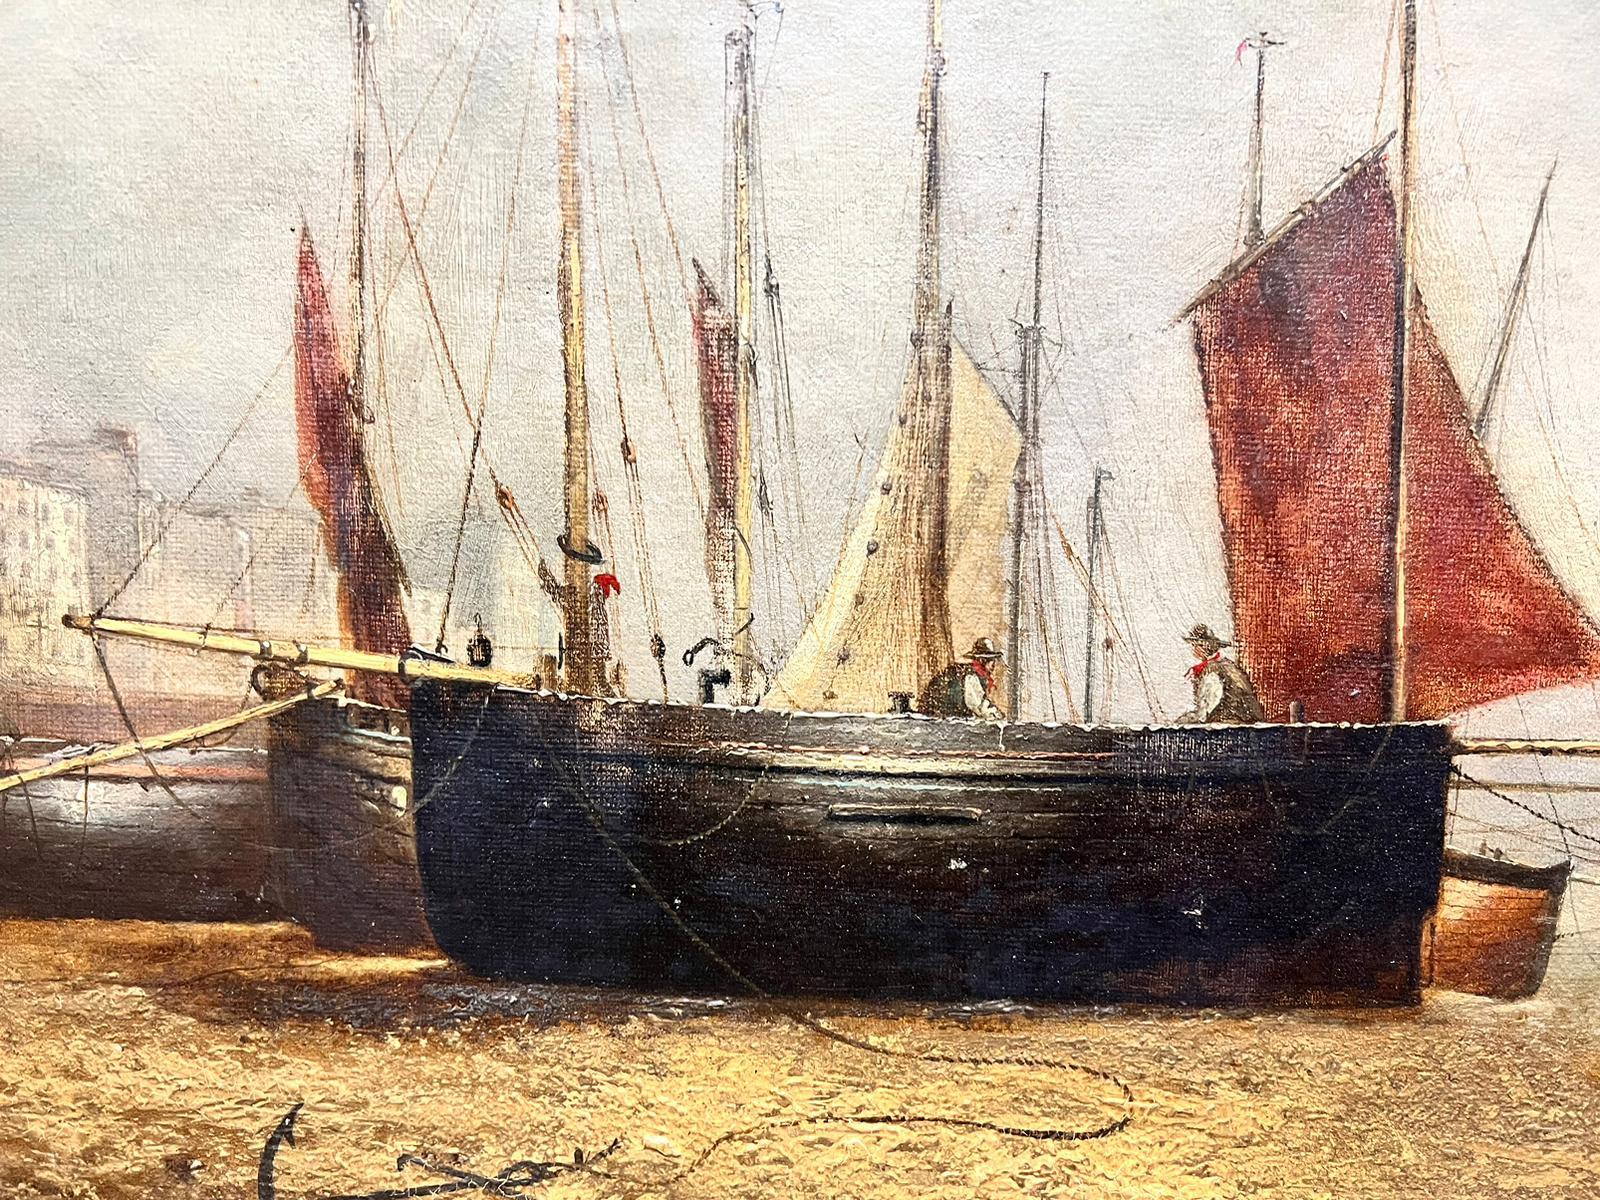 Fishing Boats along a harbour 
Dutch School (late 19th century)
indistinctly signed and dated 1879
oil on canvas, framed
framed: 22 x 32 inches
painting: 20 x 30 inches
provenance: private UK collection
The painting is in good and presentable